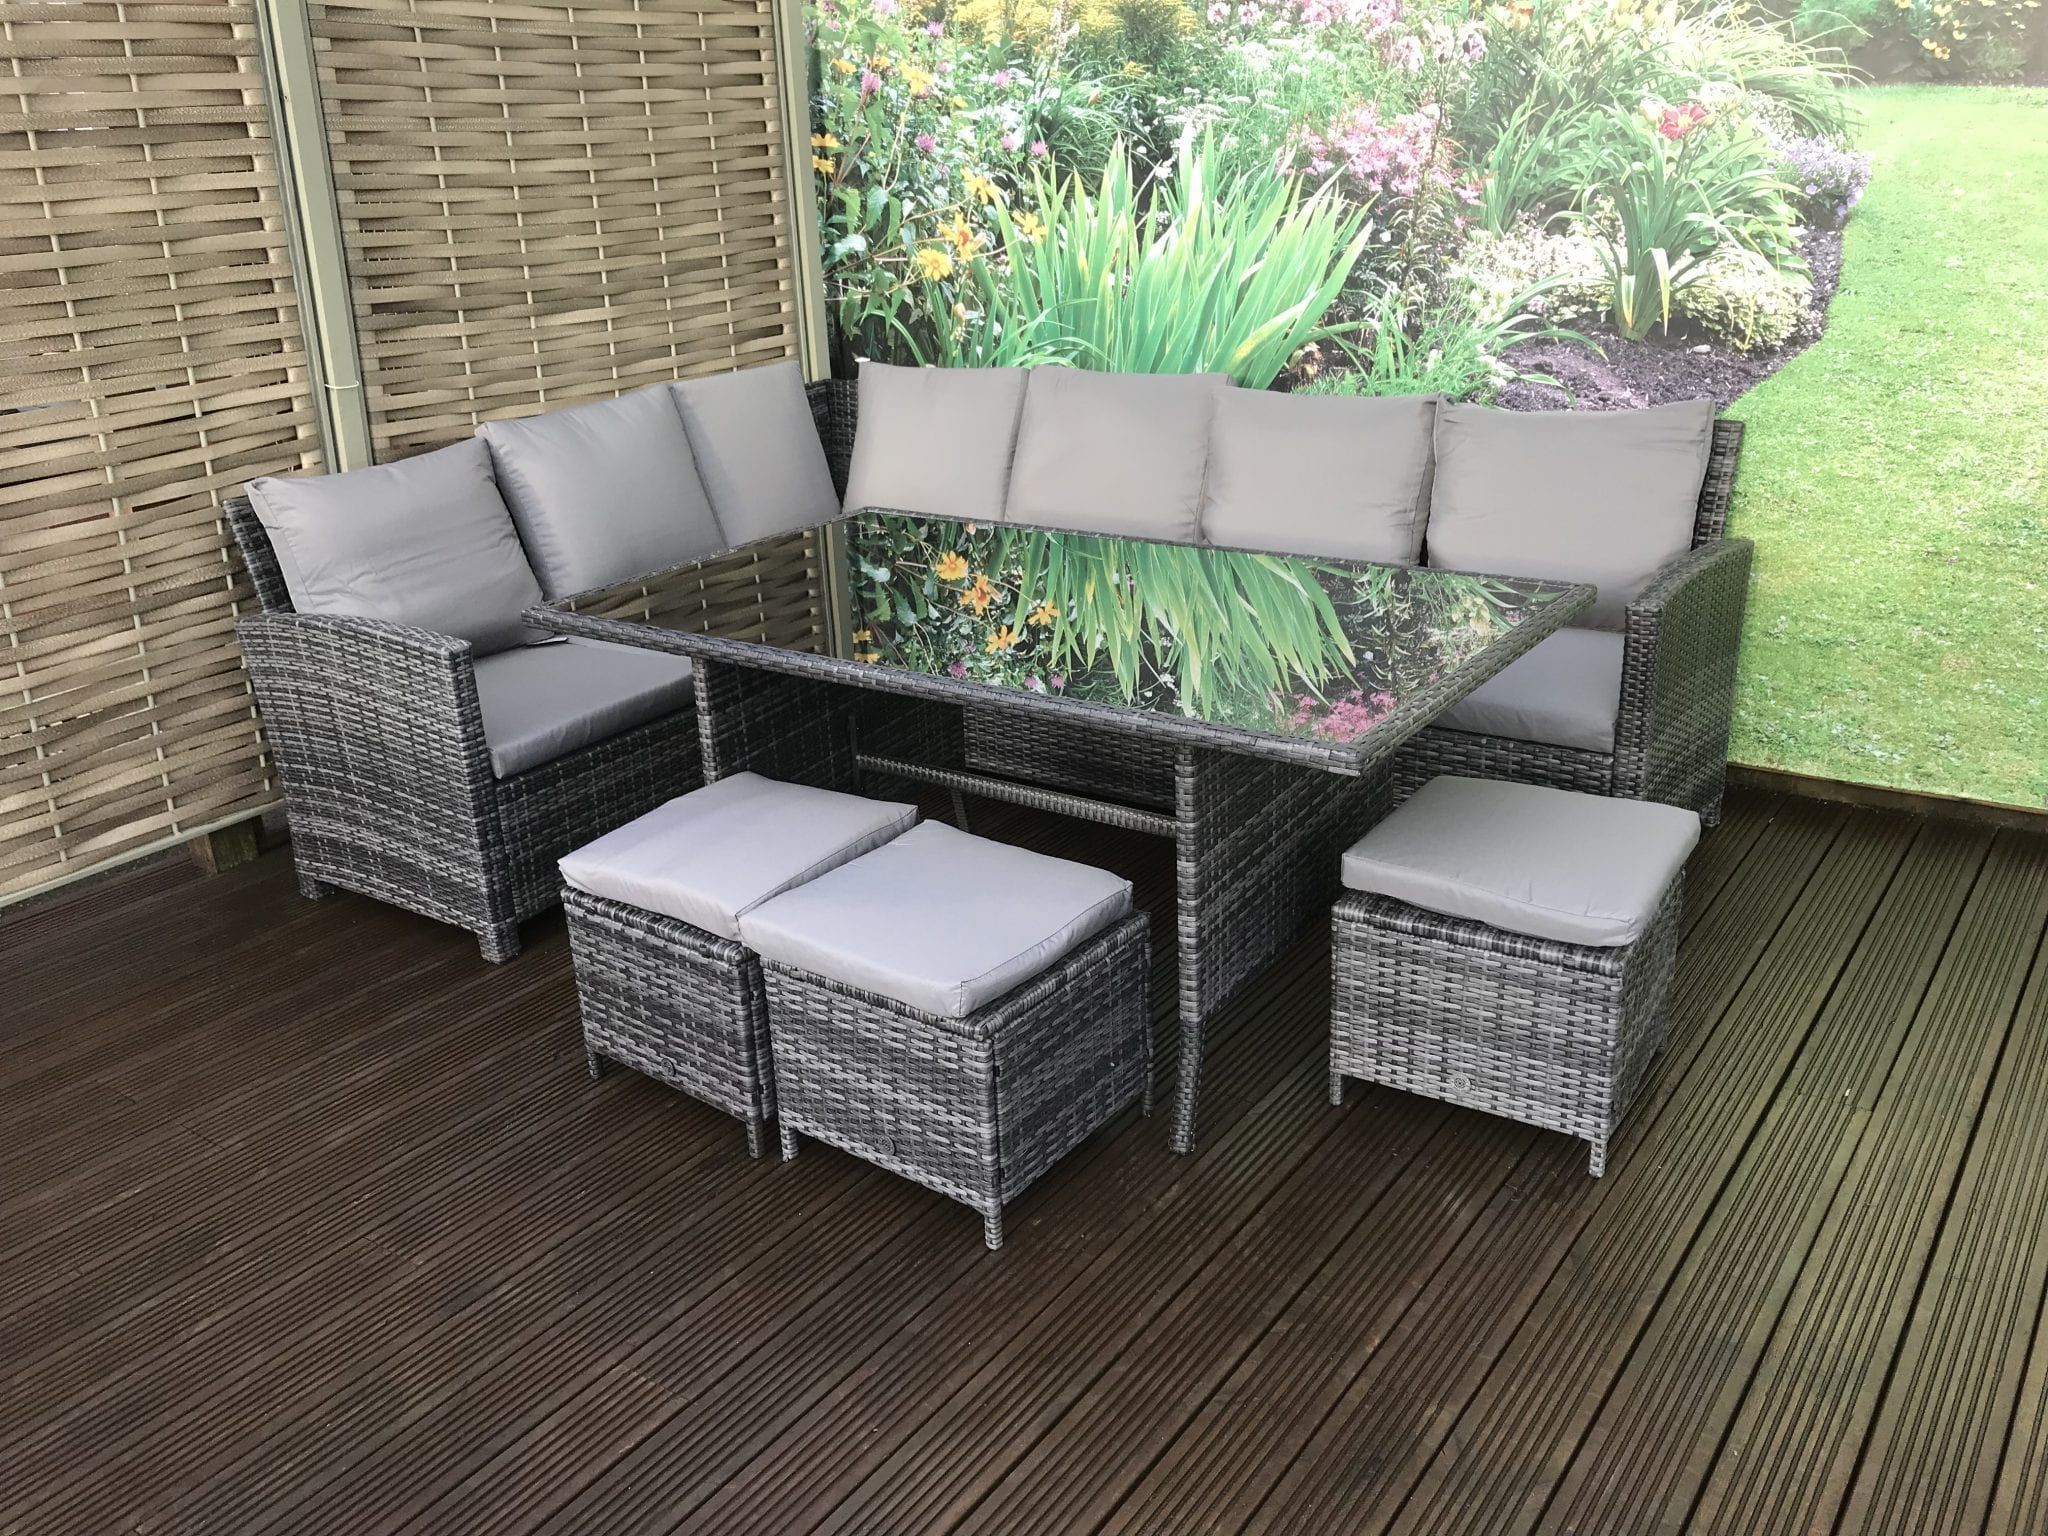 Homeflair Rattan Garden Furniture Charlotte Grey Corner Intended For Dining Sofa Chairs (View 14 of 15)